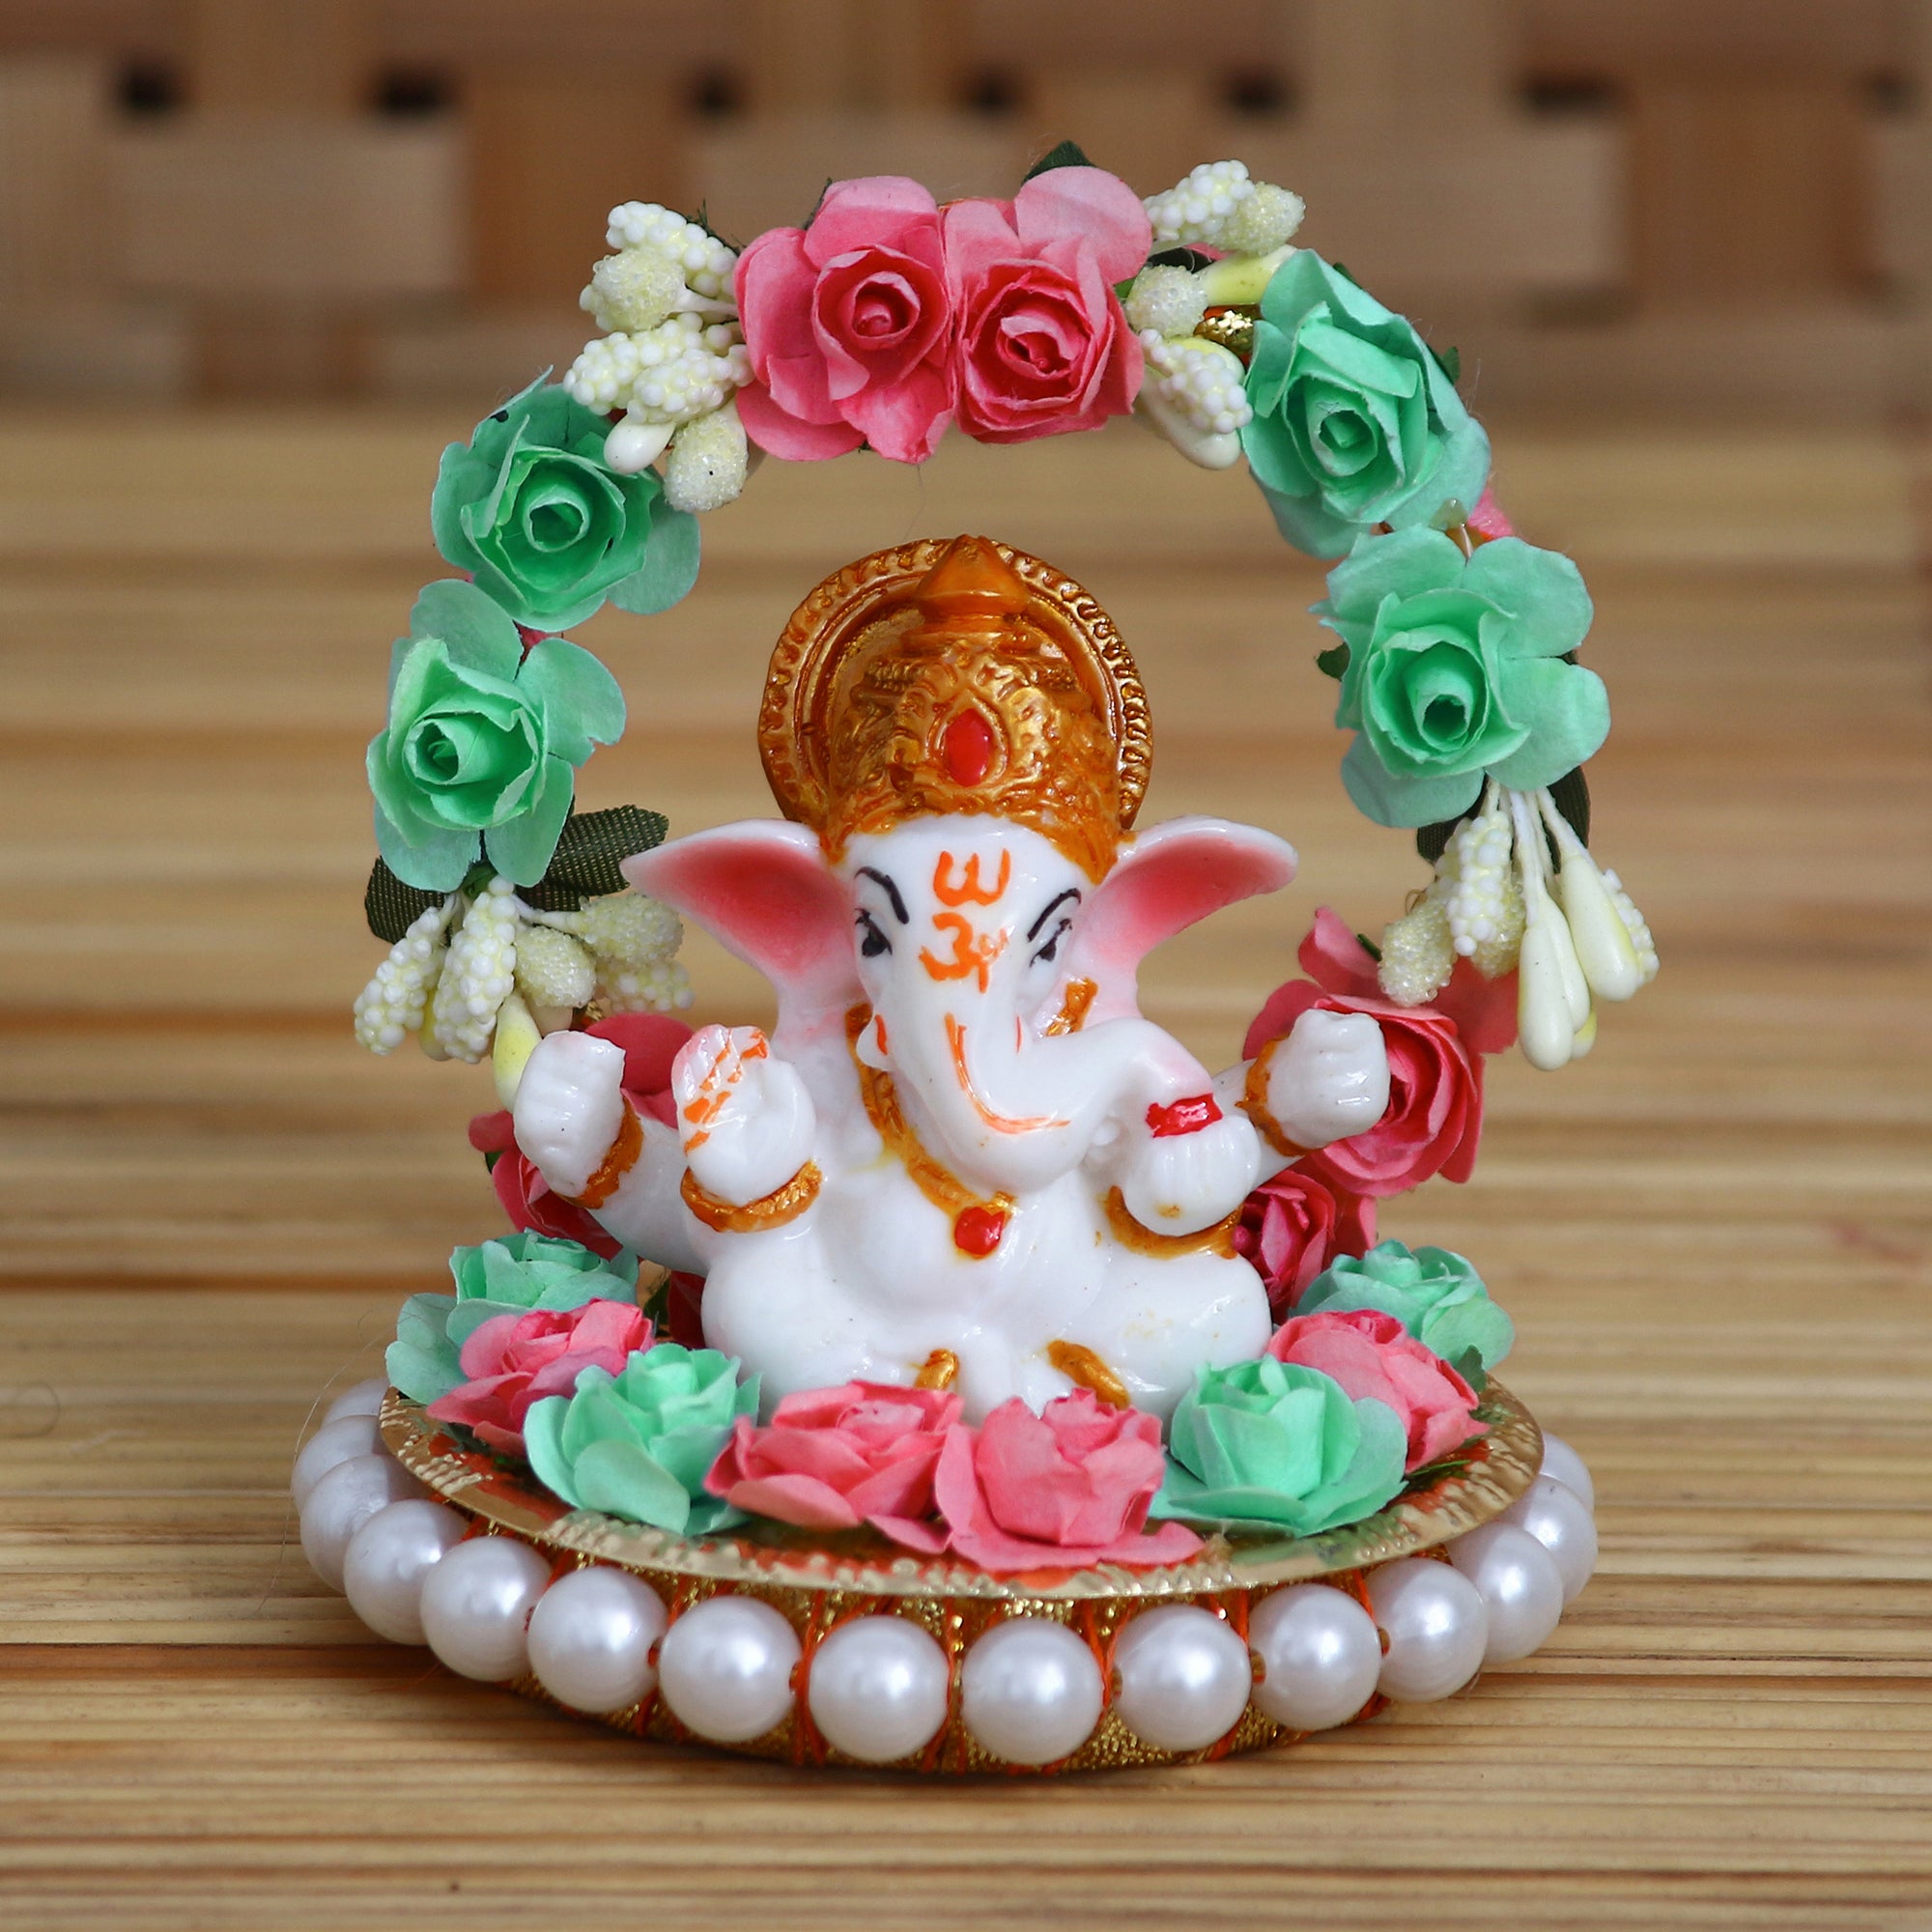 Lord Ganesha Idol On Decorative Handicrafted Plate With Throne Of Pink And Green Flowers